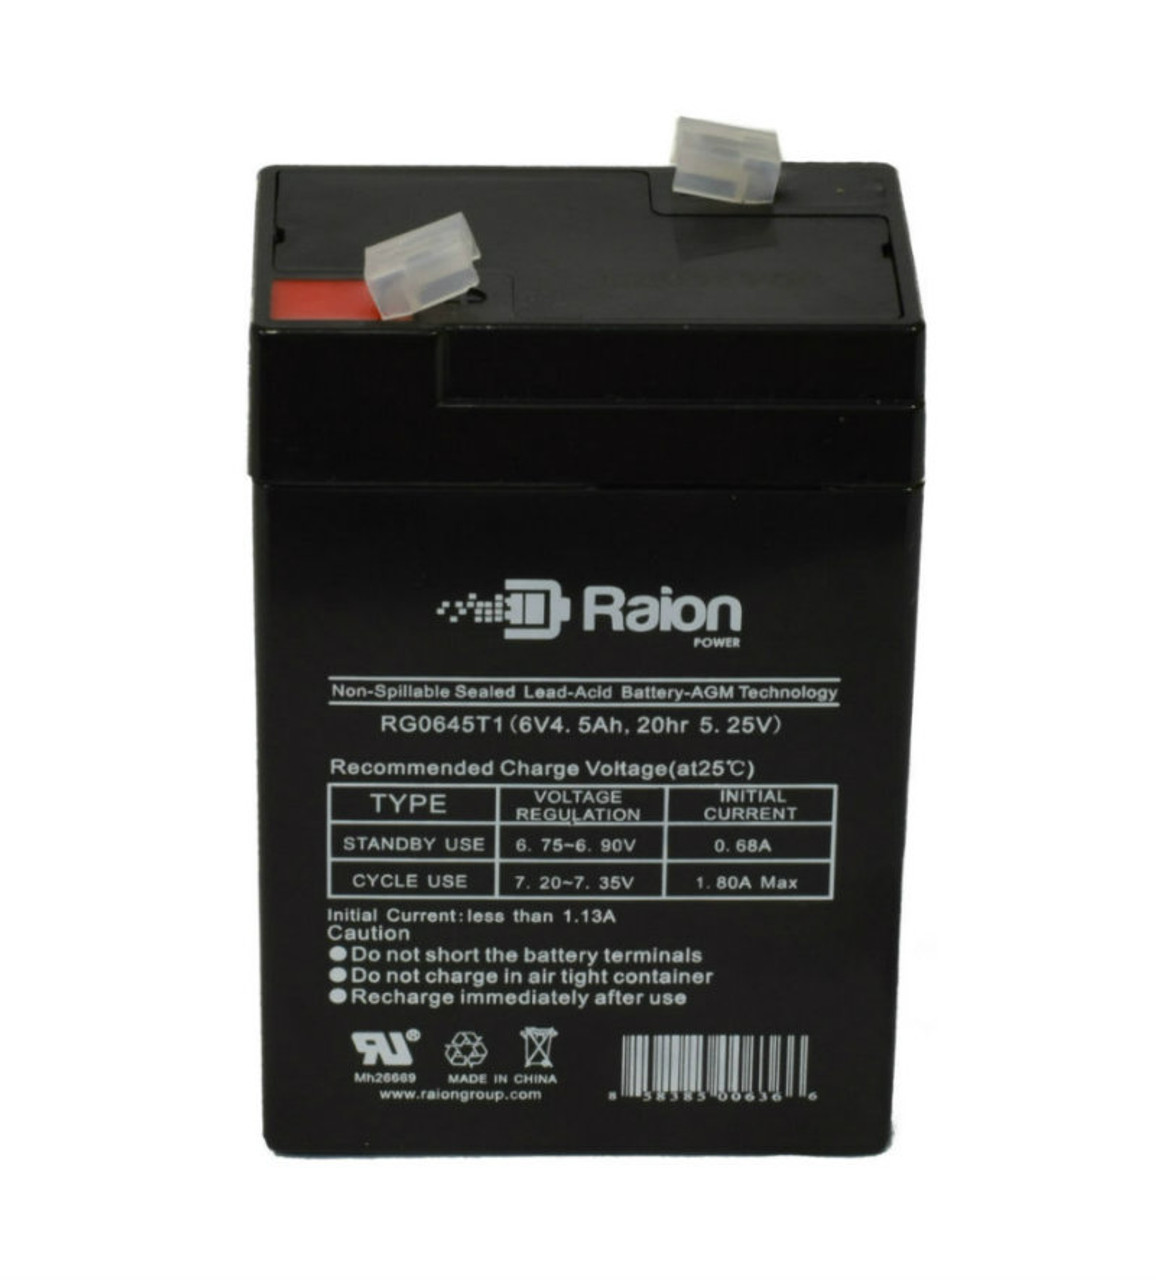 Raion Power RG0645T1 Replacement Battery Cartridge for Sentry-Lite 640